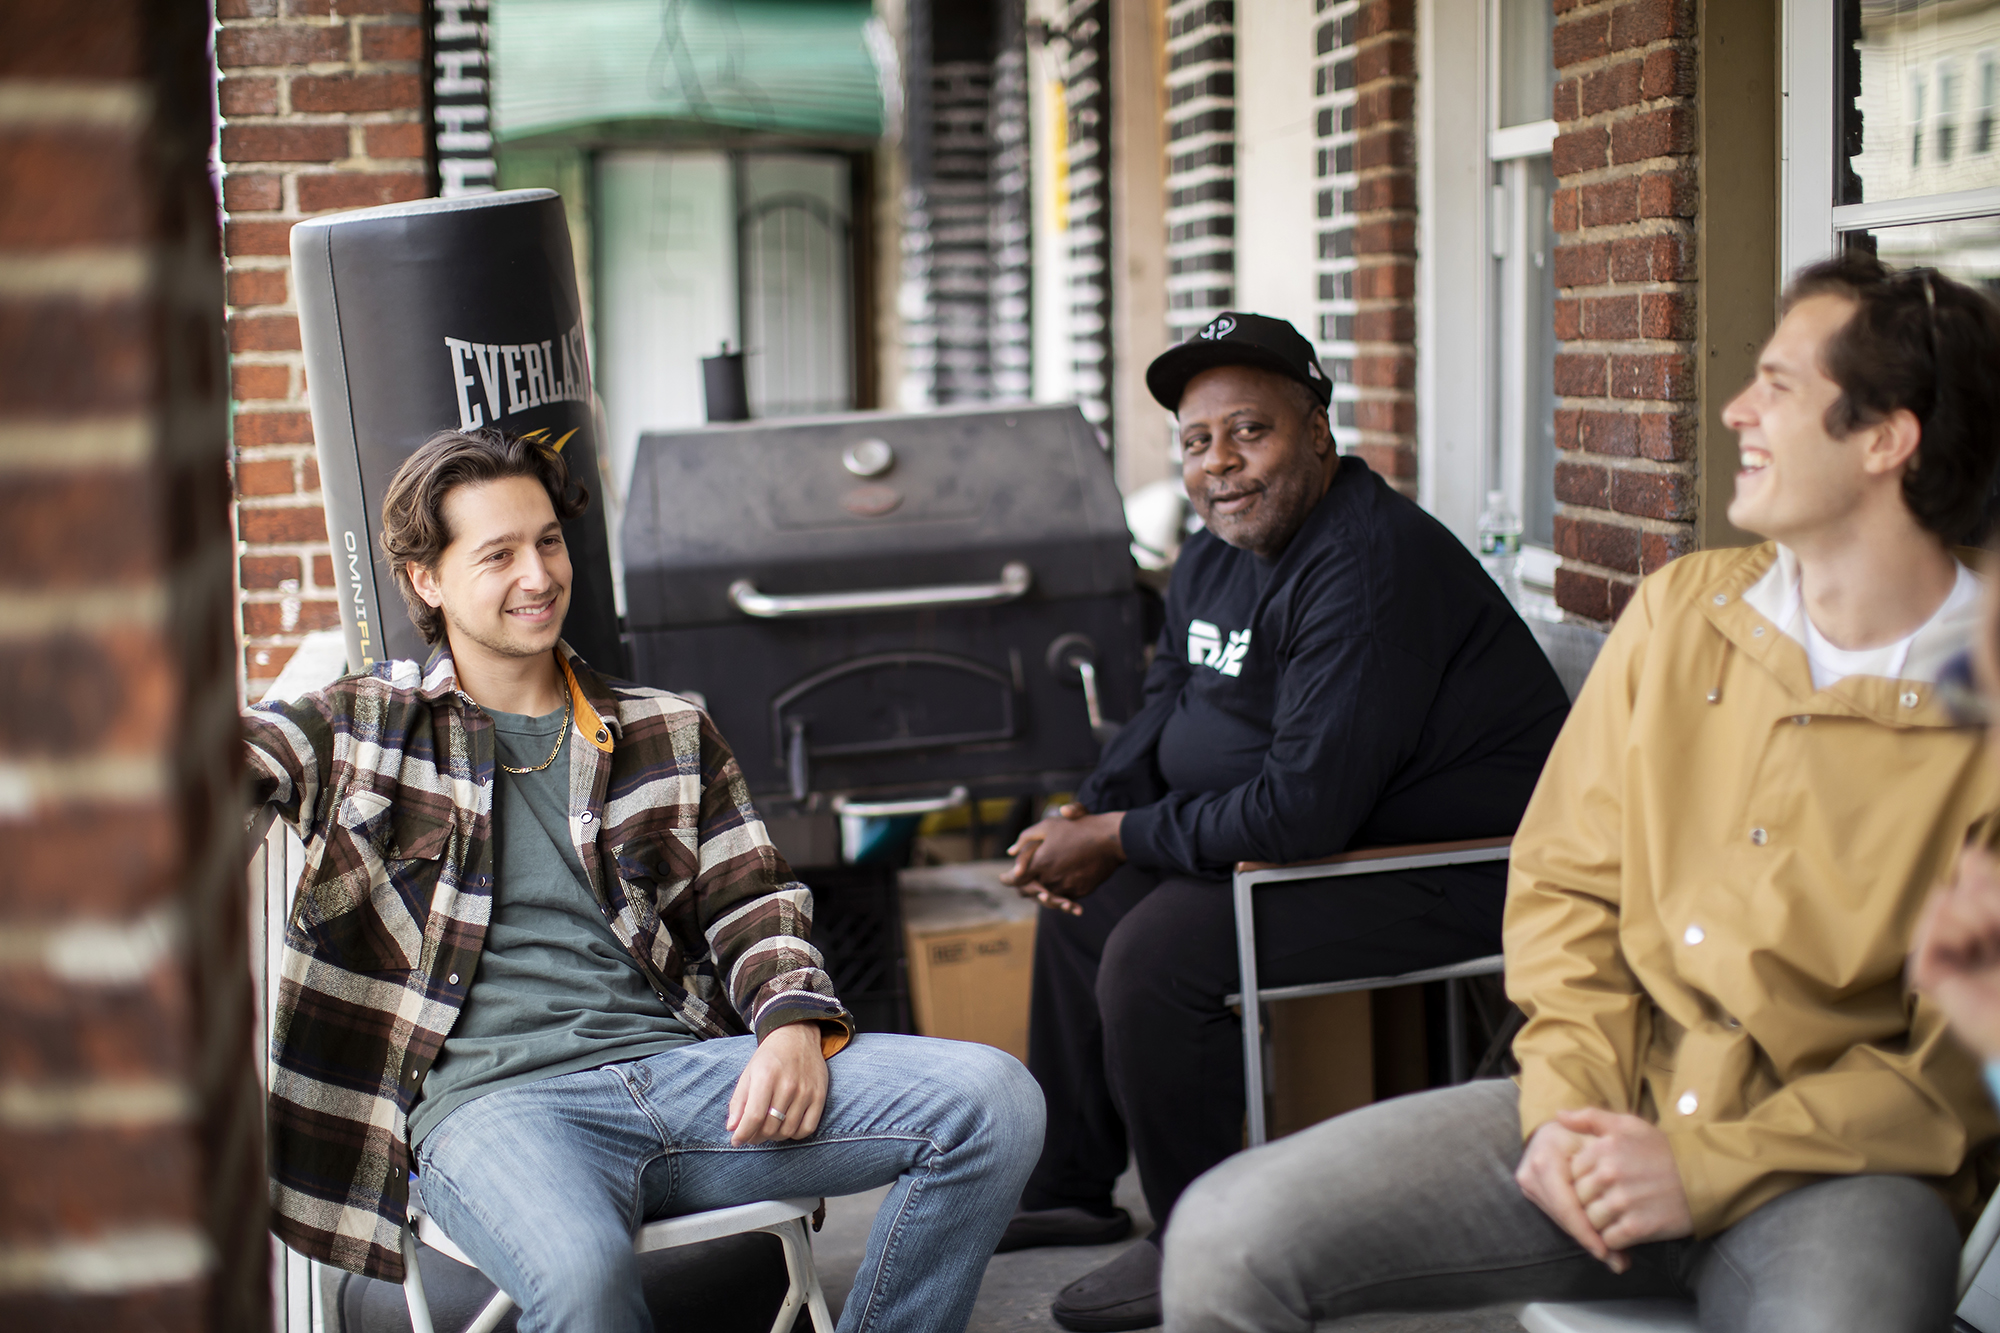 Eli Moraru, Charles Reeves, and Alex Imbot sit on Reeves' front porch in South Philadelphia